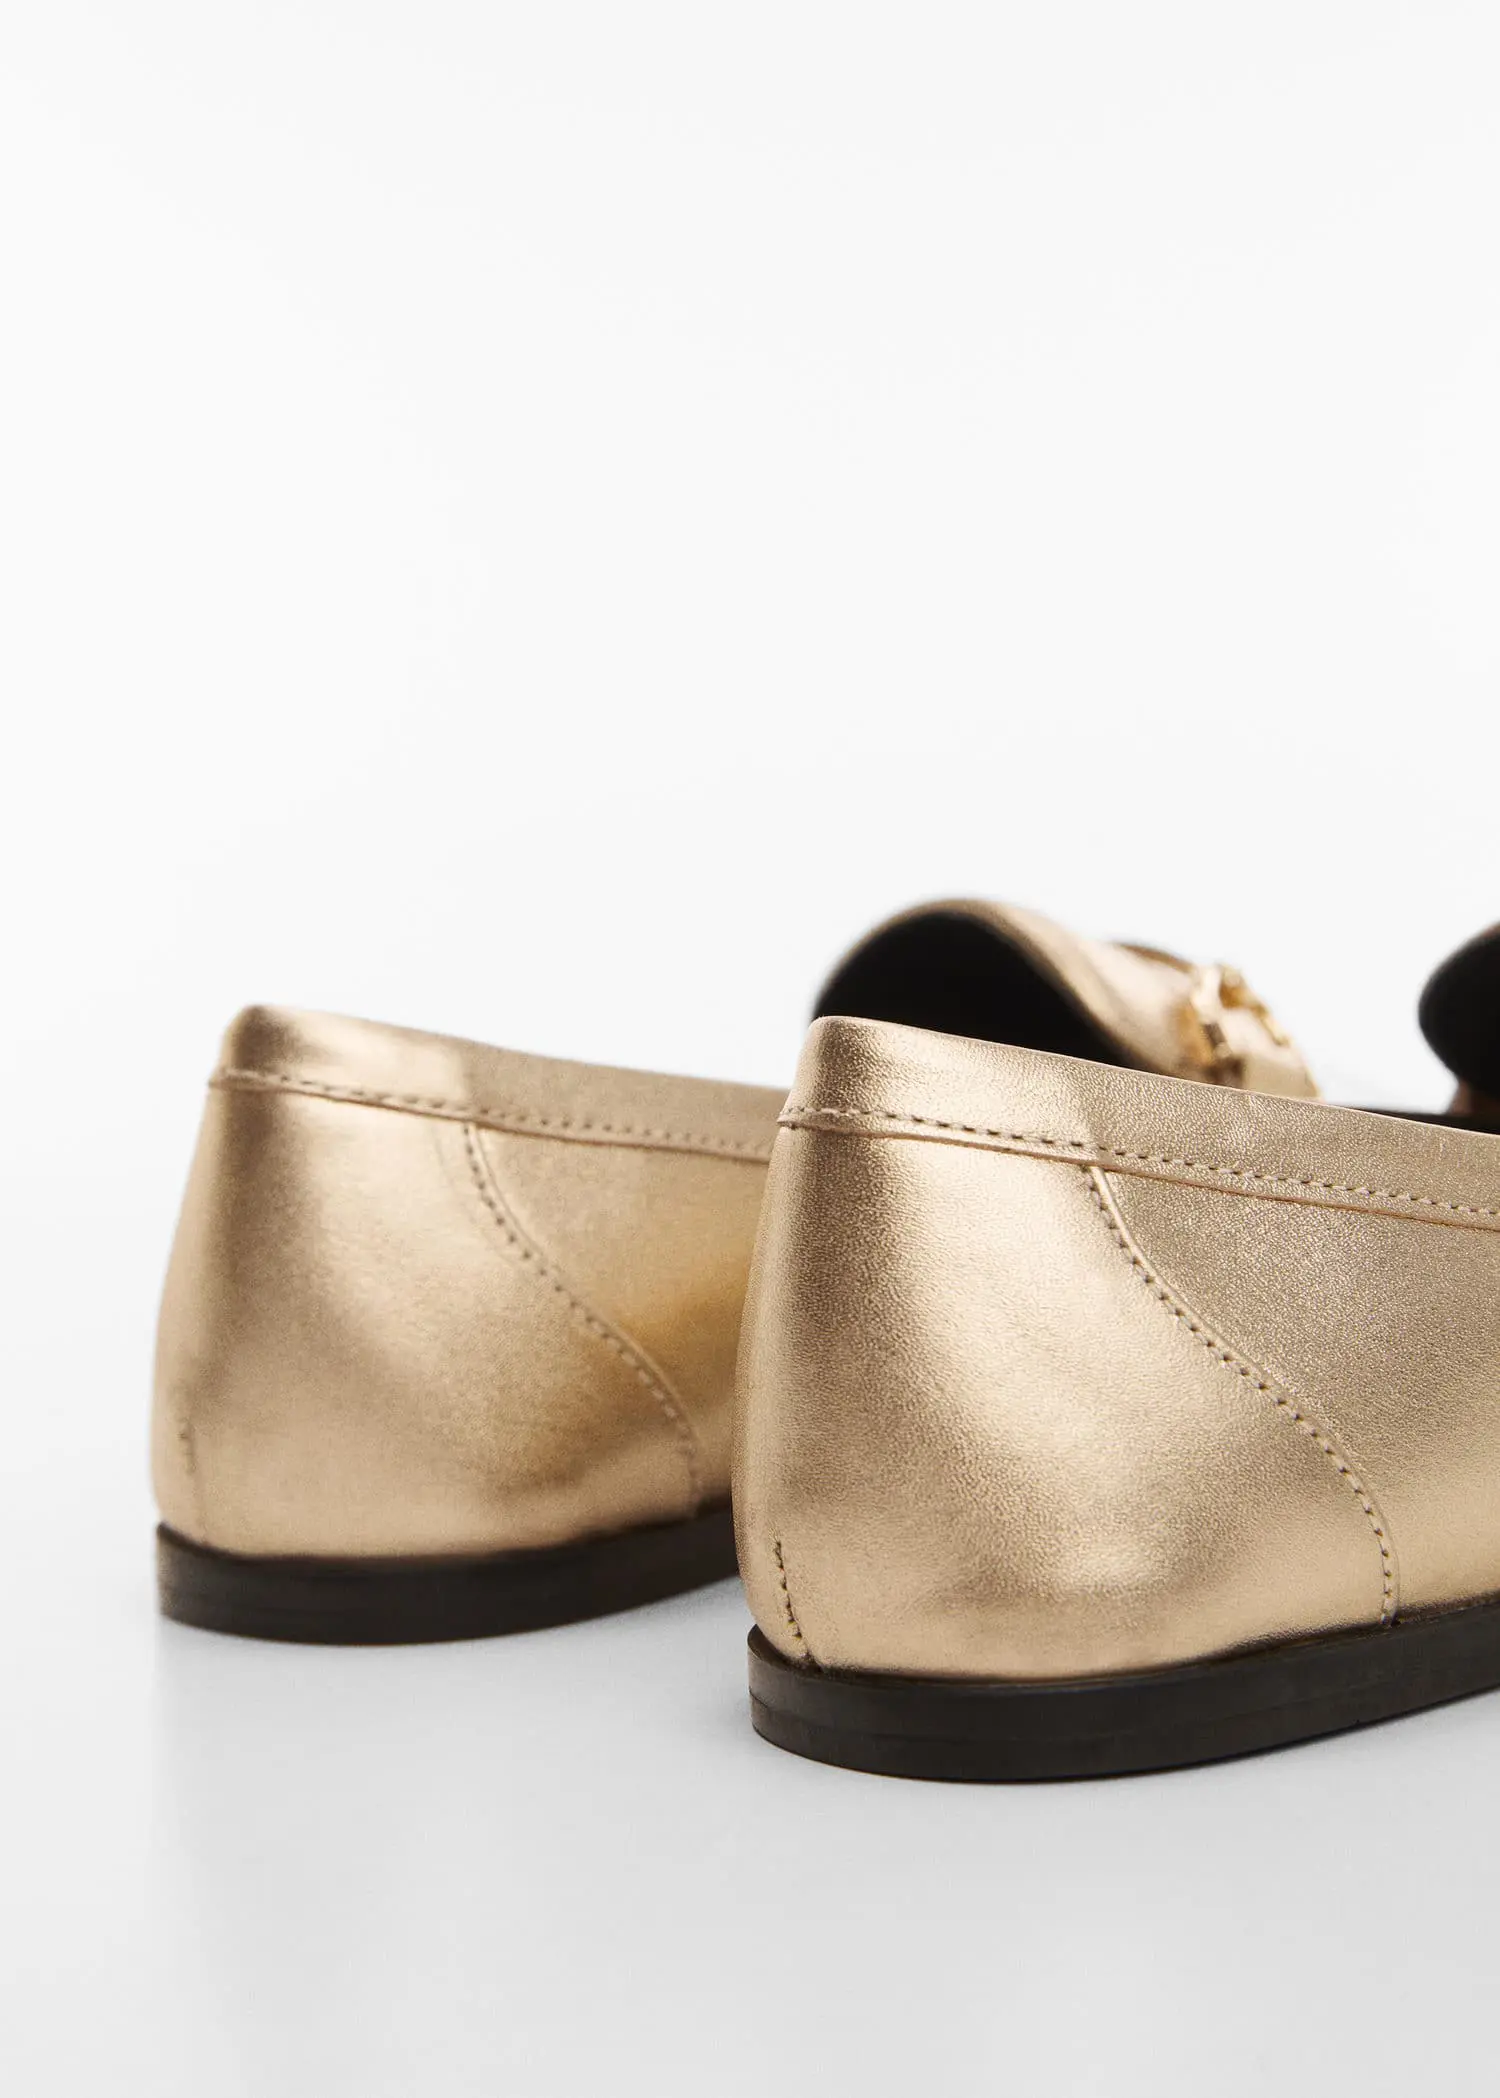 Mango Leather moccasins with metallic detail. 2